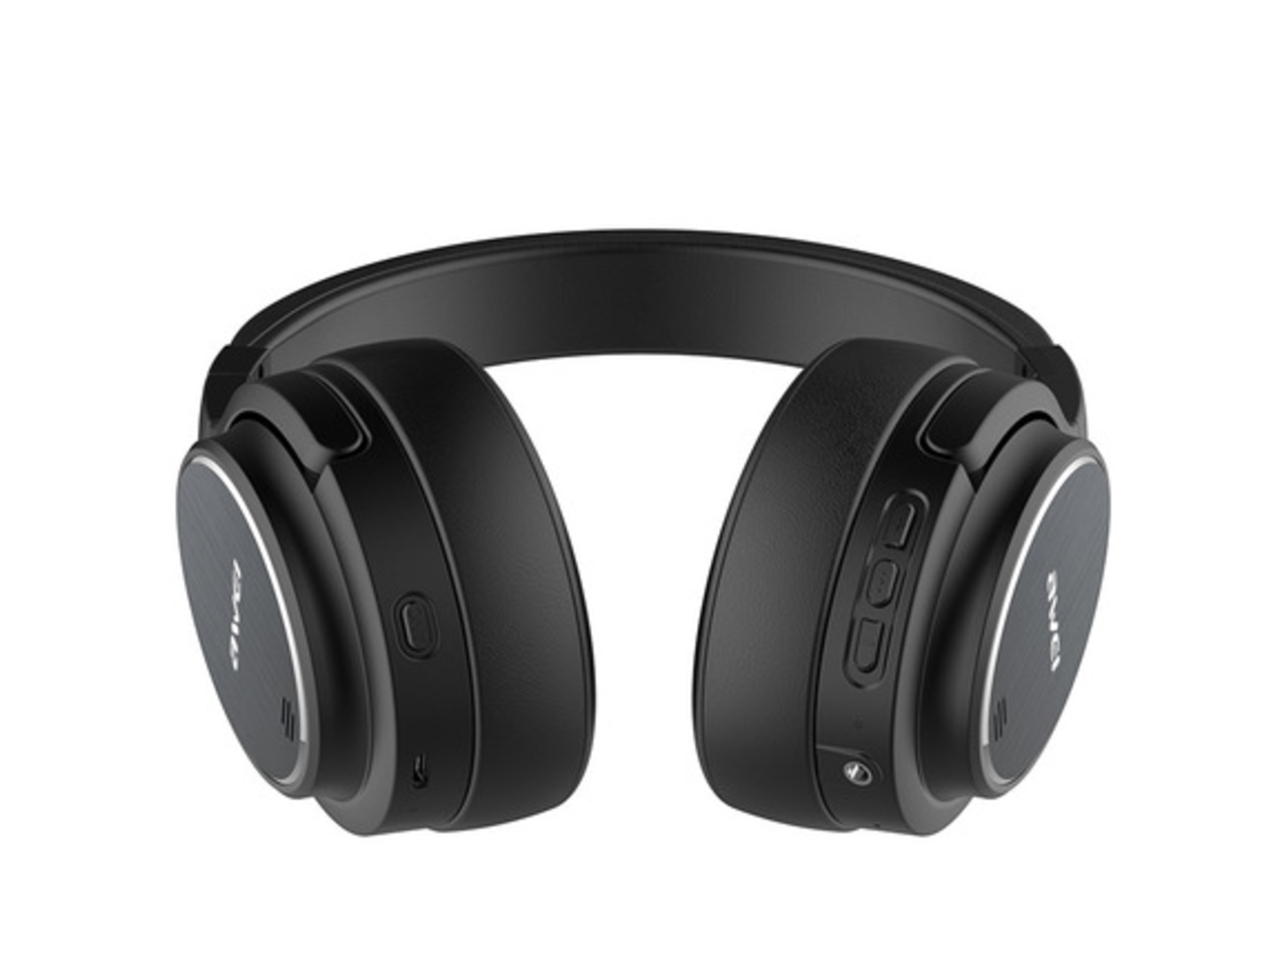 heuvel weten Snikken Awei A950BL Wireless Bluetooth Headset, Noise Reduction Stereo, 2160 Hours  Standby, 40 Hours of Playback, 1050 Battery Life, Foldable, Sound System,  Sports Headphones - Newegg.com